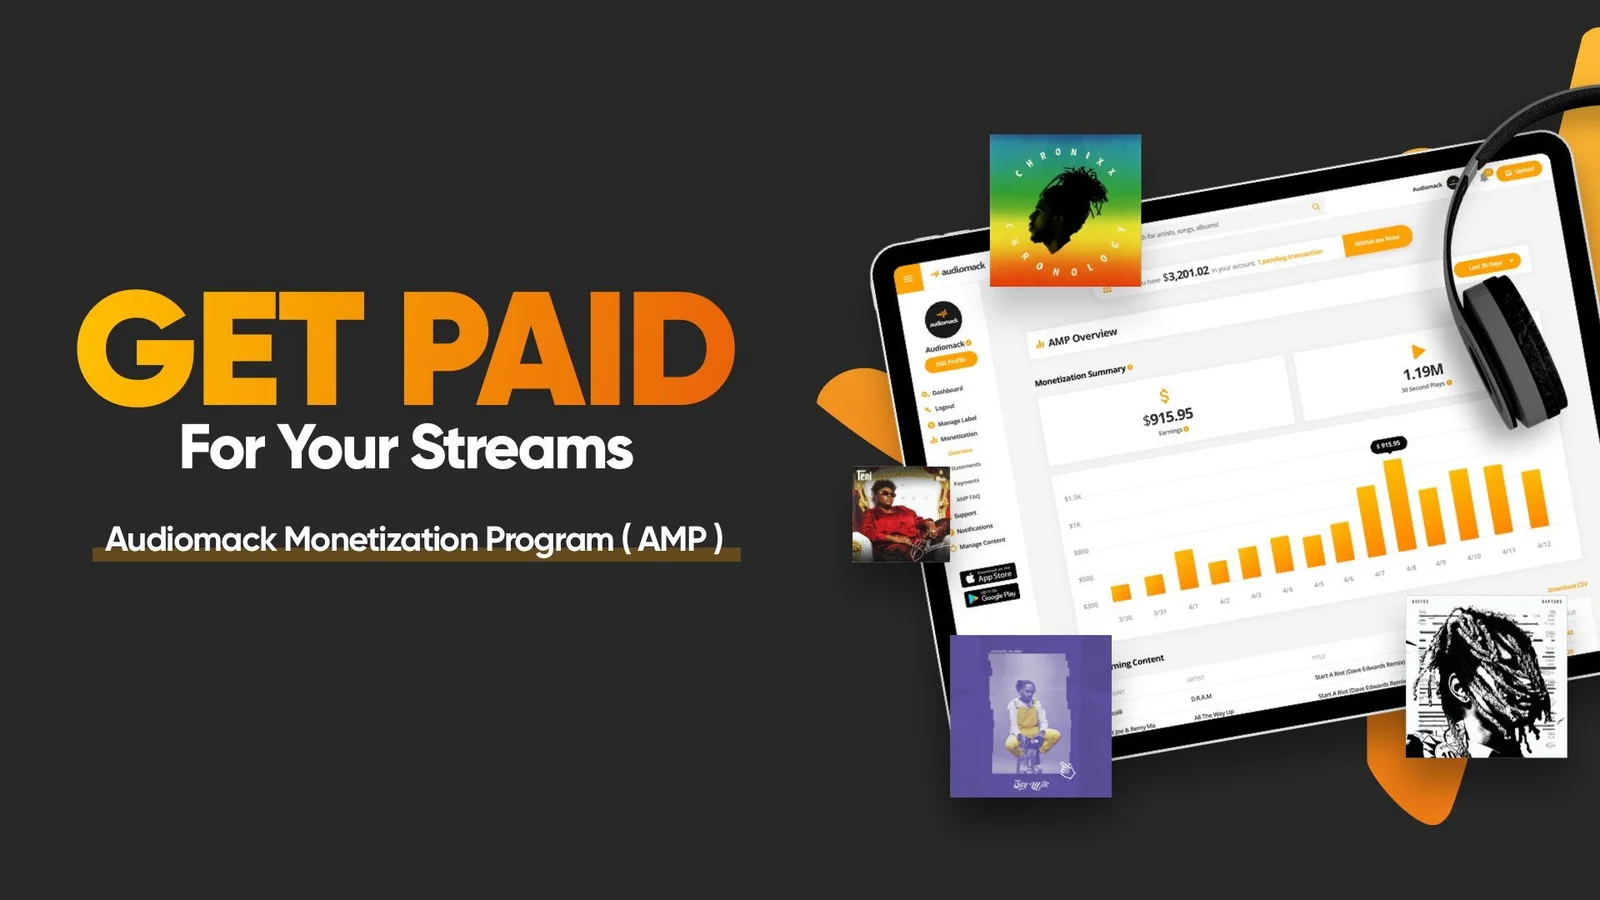 How to earn on audiomack in nigeria